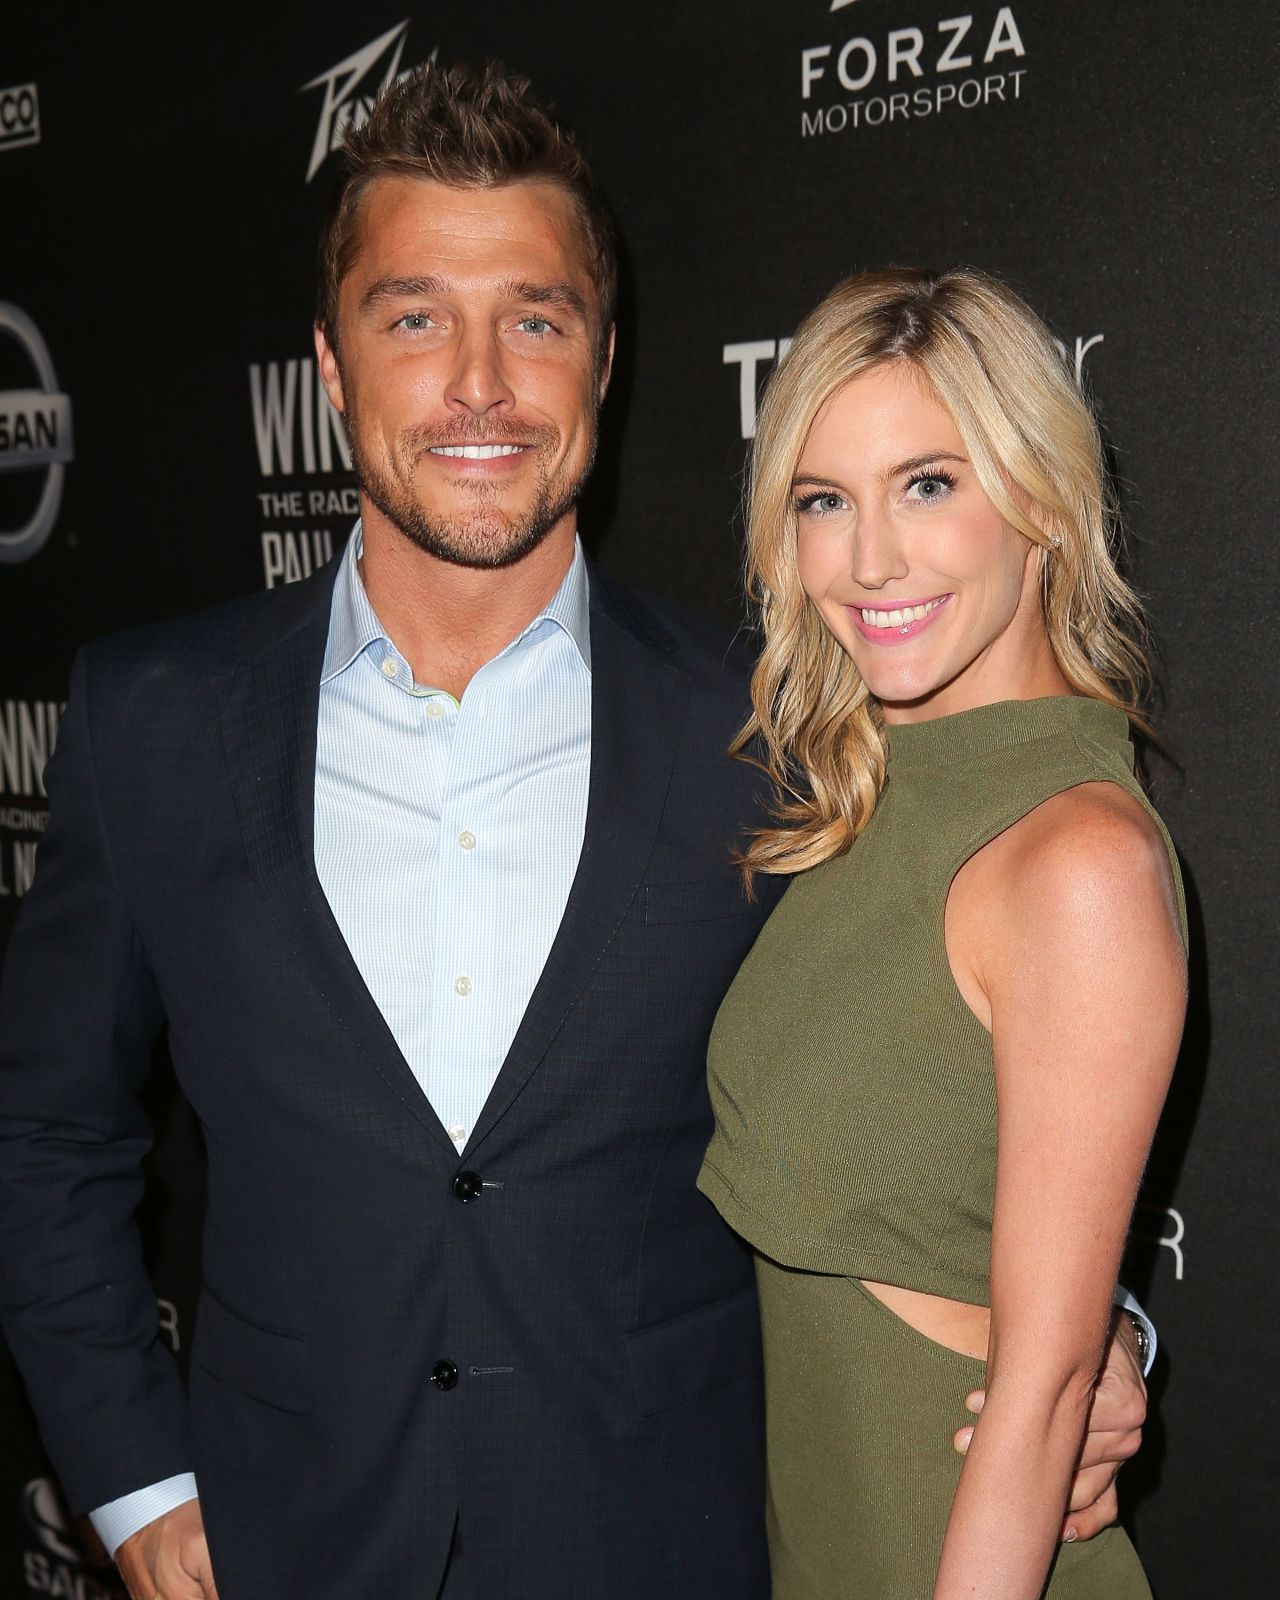 Farmer Chris Soules and fertility nurse Whitney Bischoff called it quits after a six-month engagement, according to Mike Fleiss, the show's creator and producer. Soules competed on season 20 of "Dancing With the Stars." 